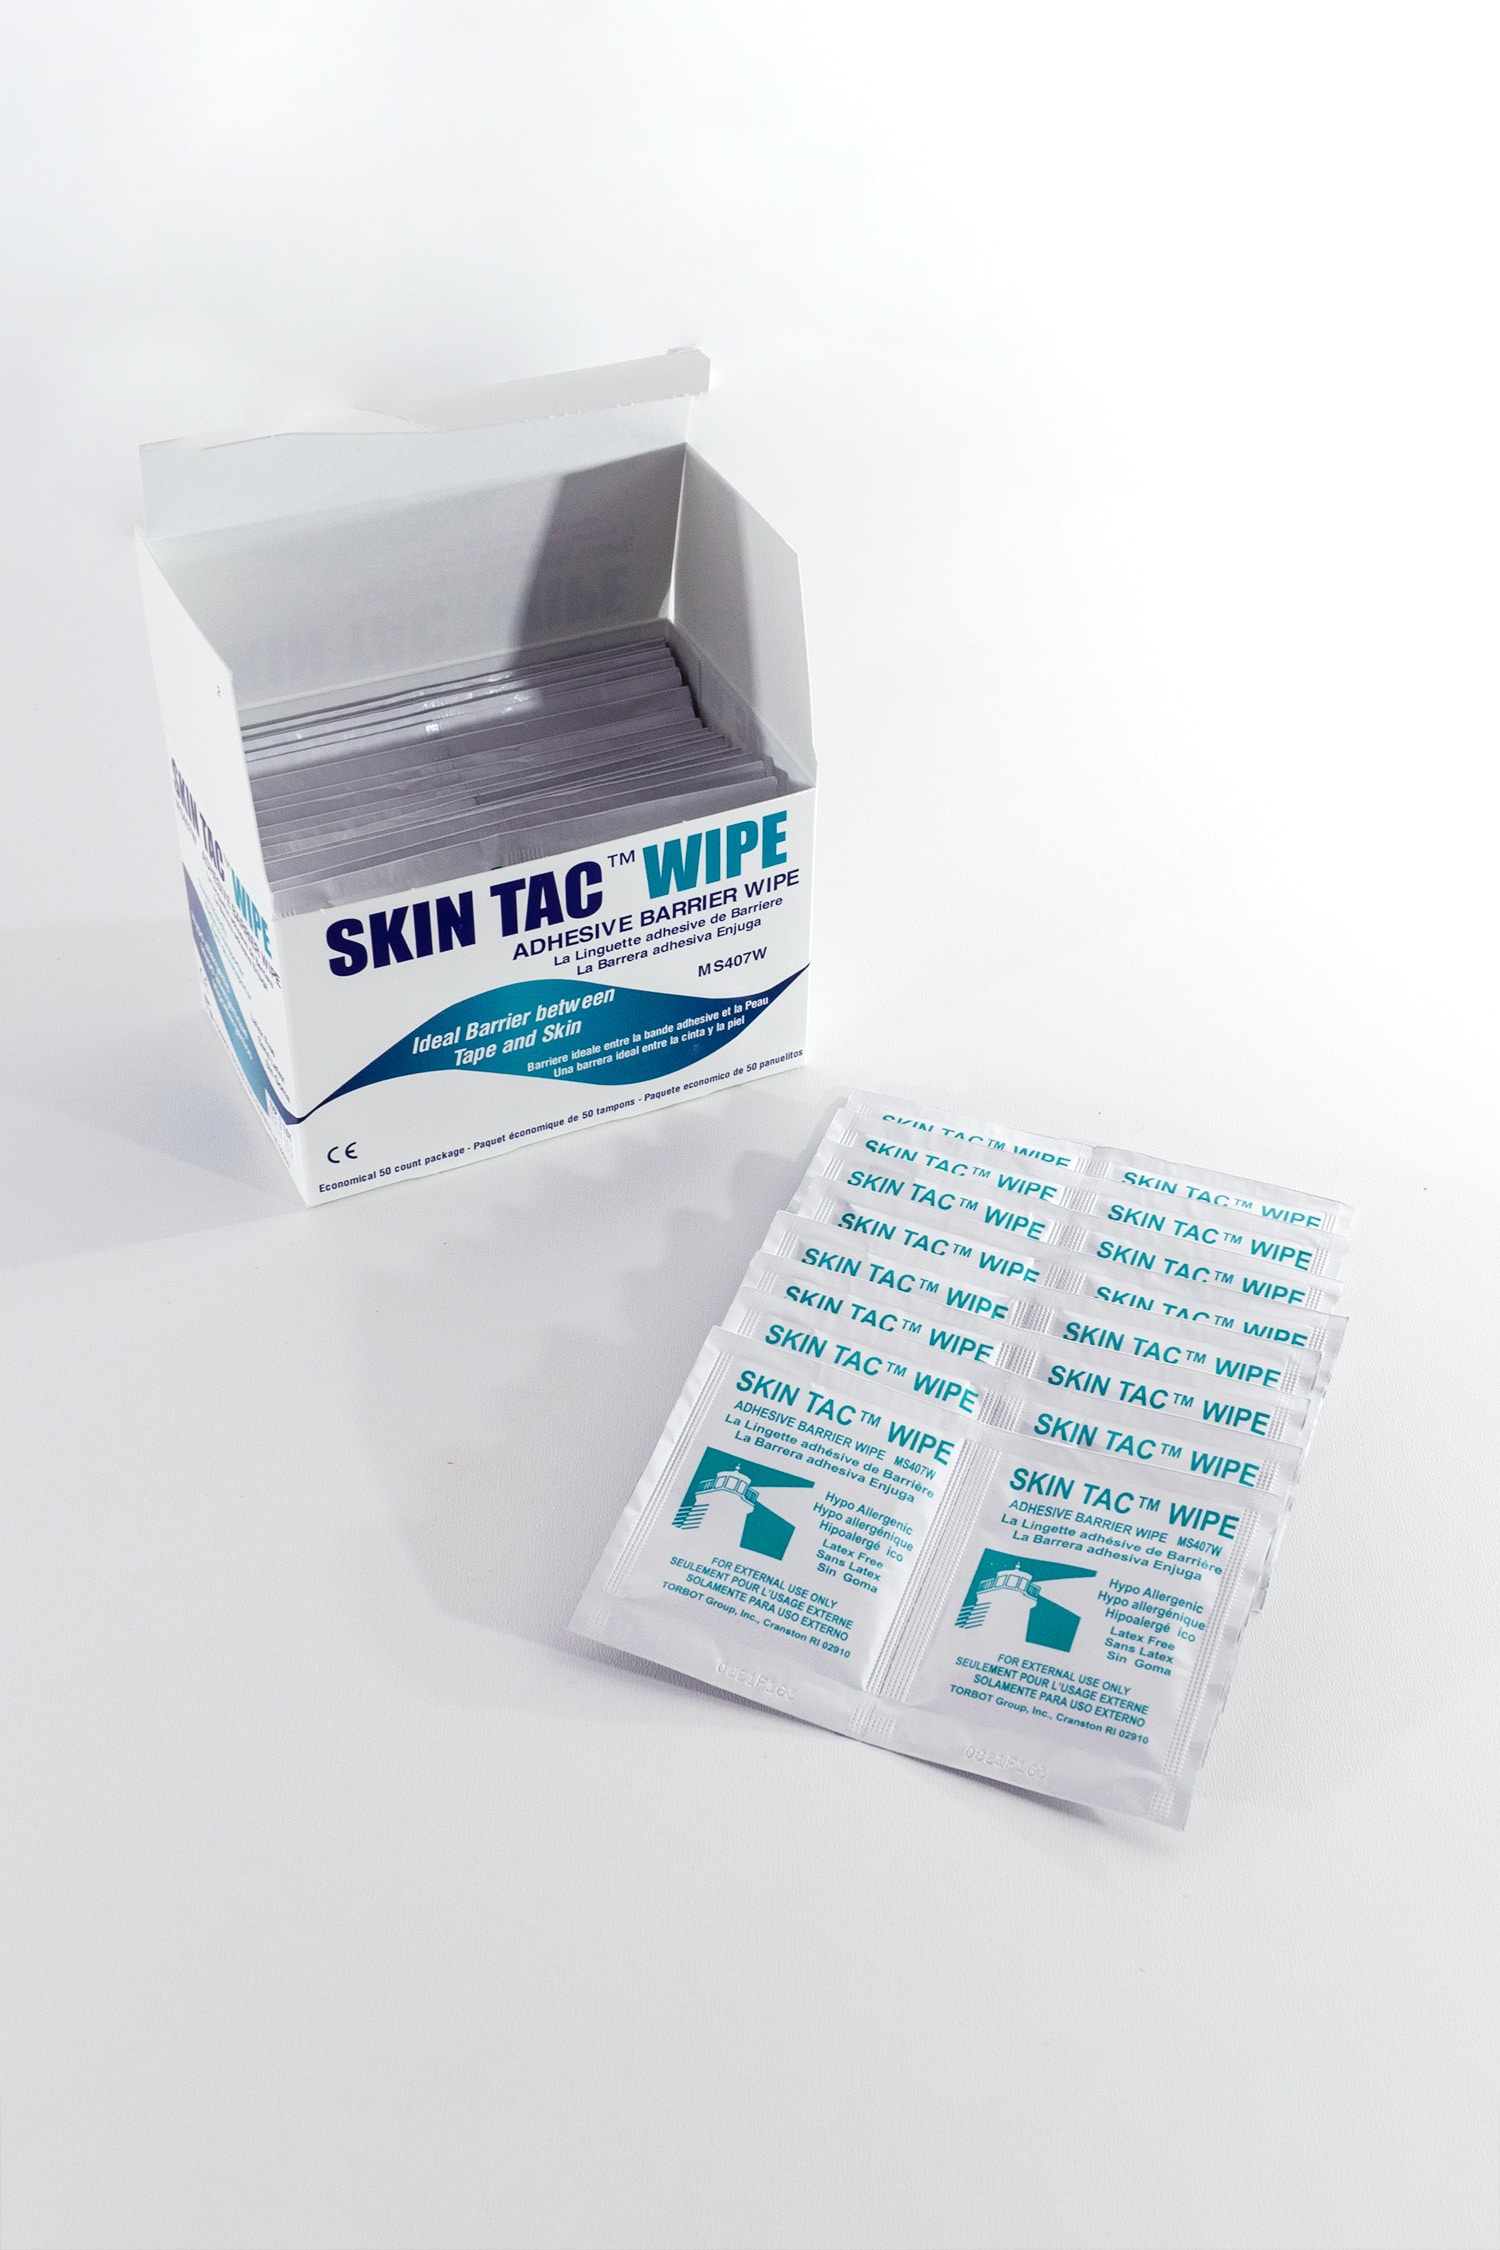 Buy Torbot Skin Tac Adhesive Wipes MS407W - Box of 50 online!